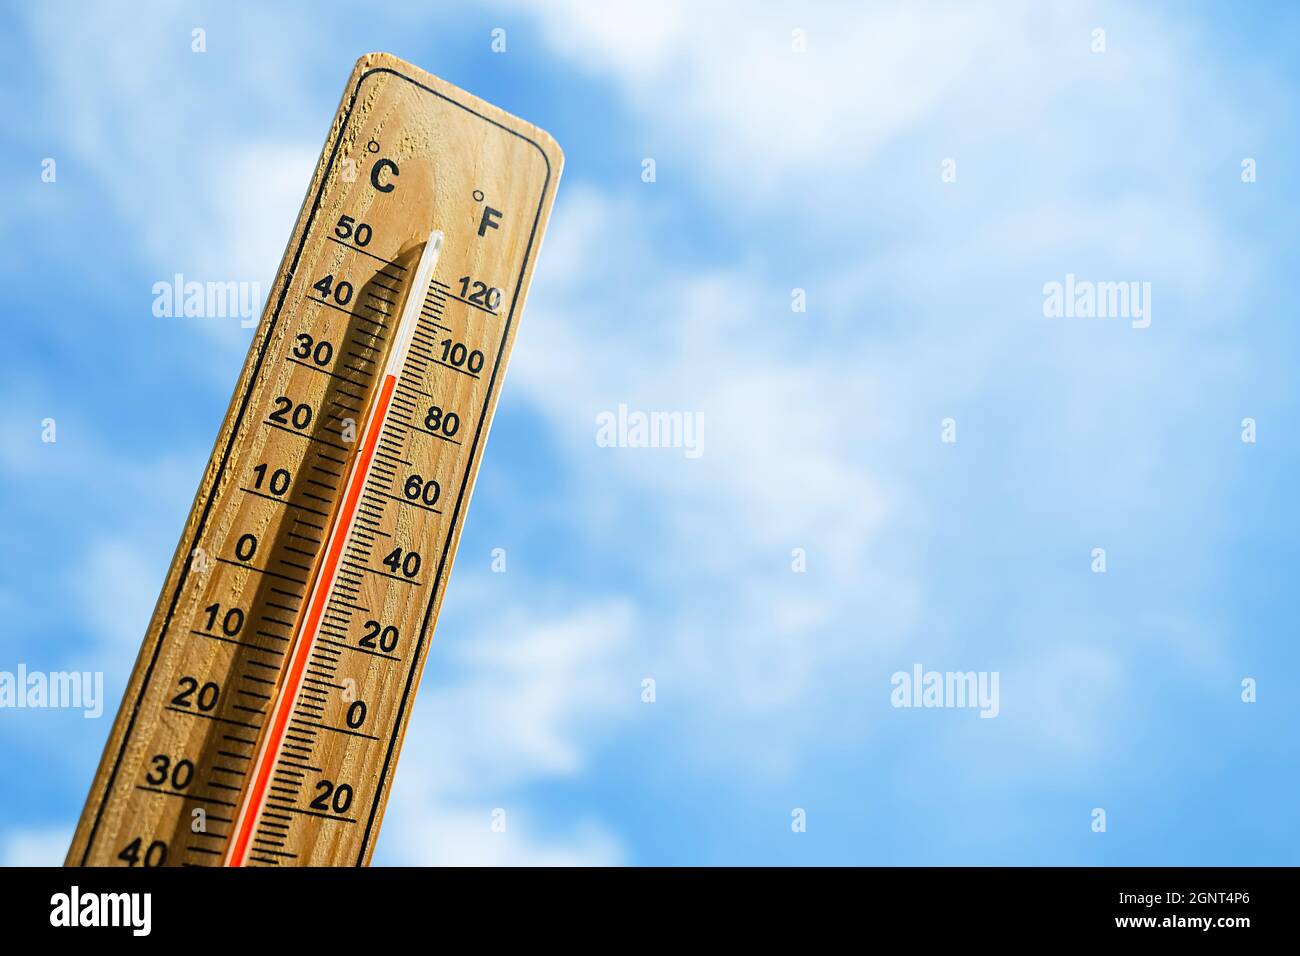 https://c8.alamy.com/comp/2GNT4P6/wooden-thermometer-with-red-measuring-liquid-showing-high-temperature-over-32-degrees-celsius-on-background-of-blue-sky-with-clouds-concept-of-heat-w-2GNT4P6.jpg